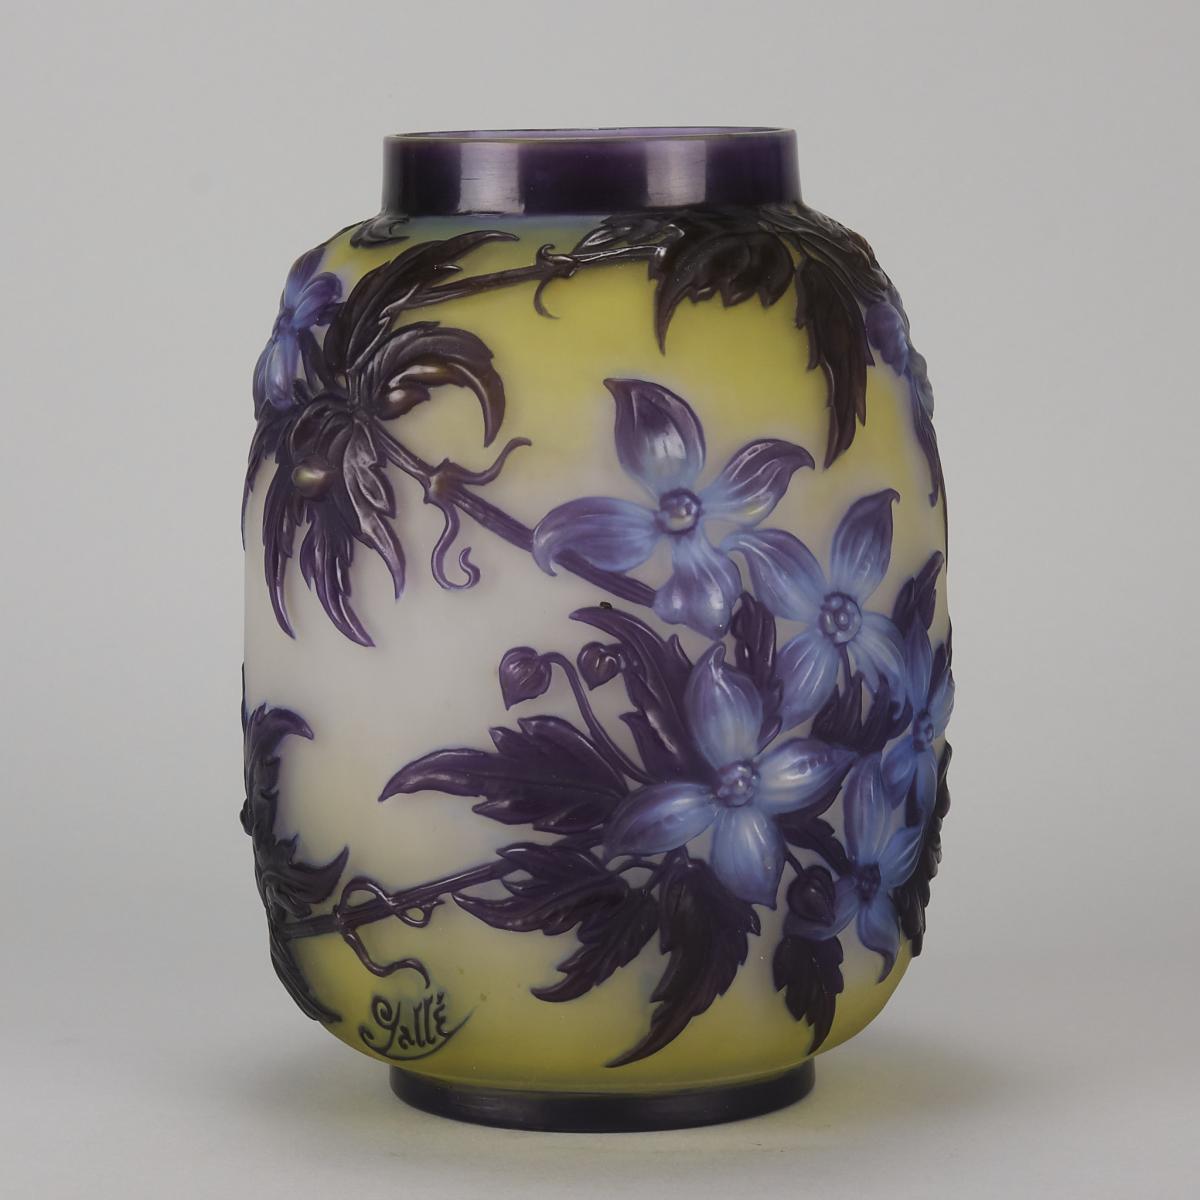 Early 20th French Cameo Glass Vase entitled "Clematis Vase" by Emille Galle